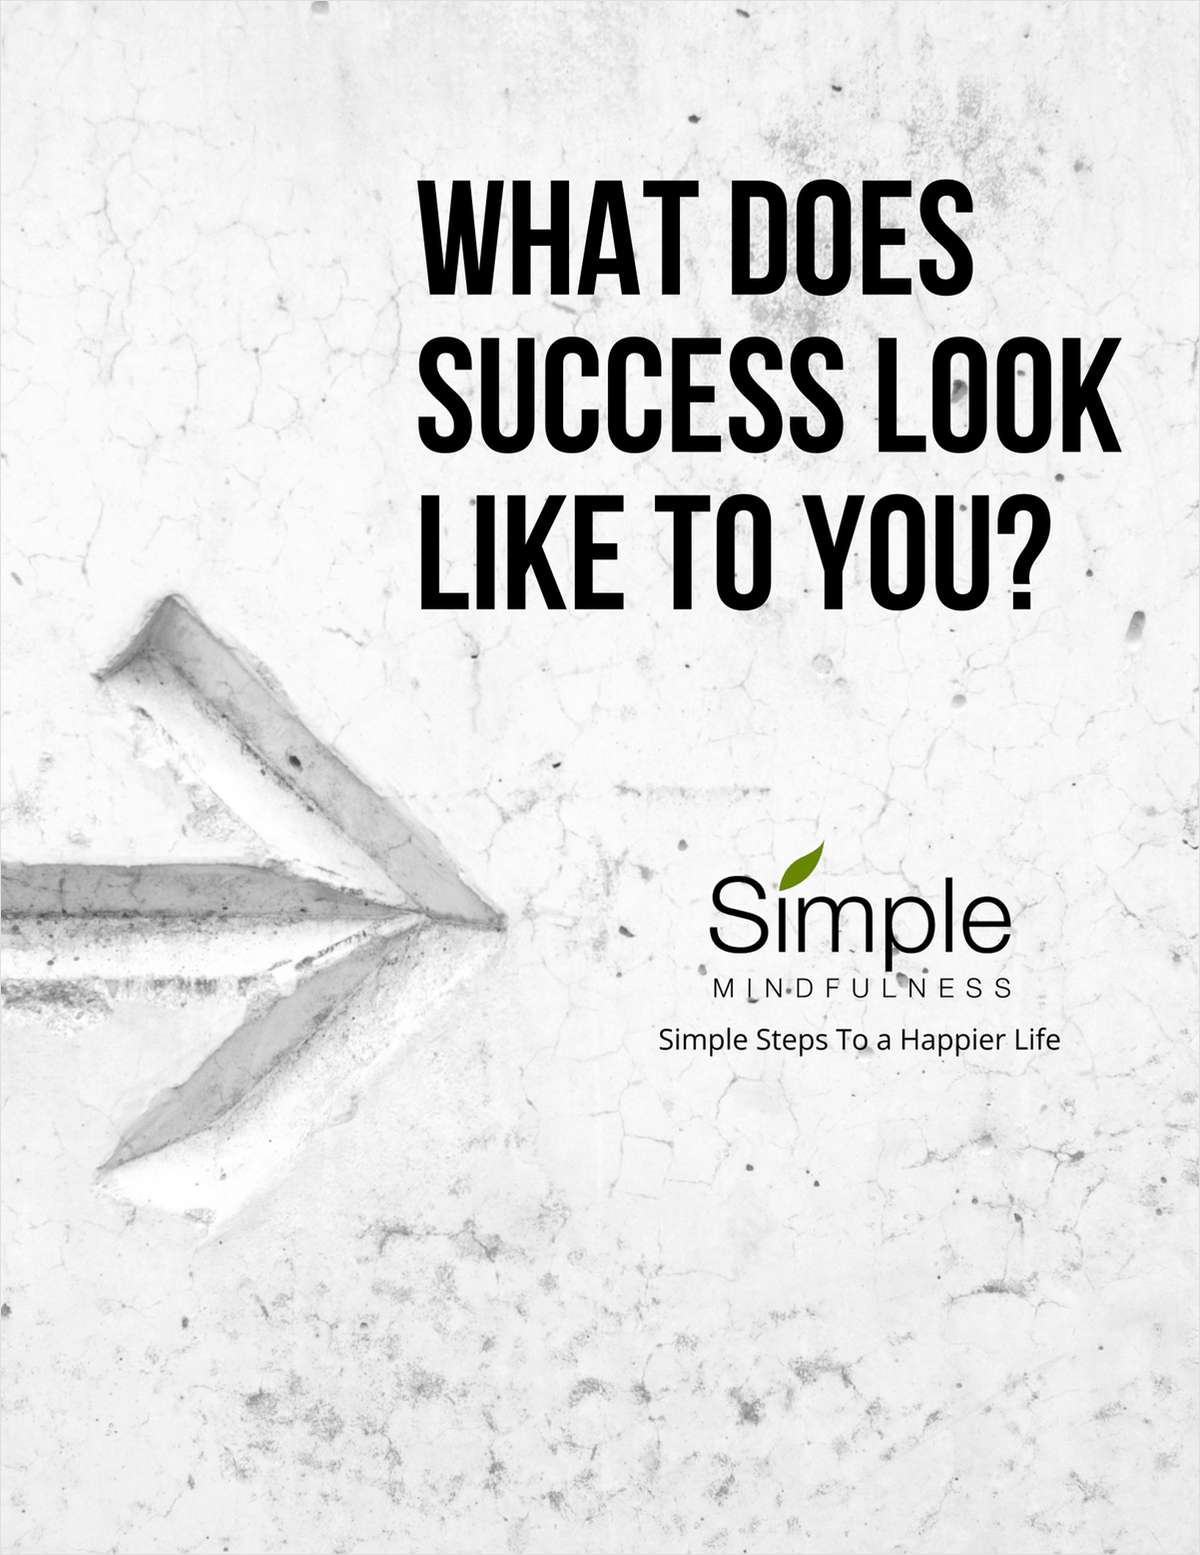 What Does Success Look Like To You?